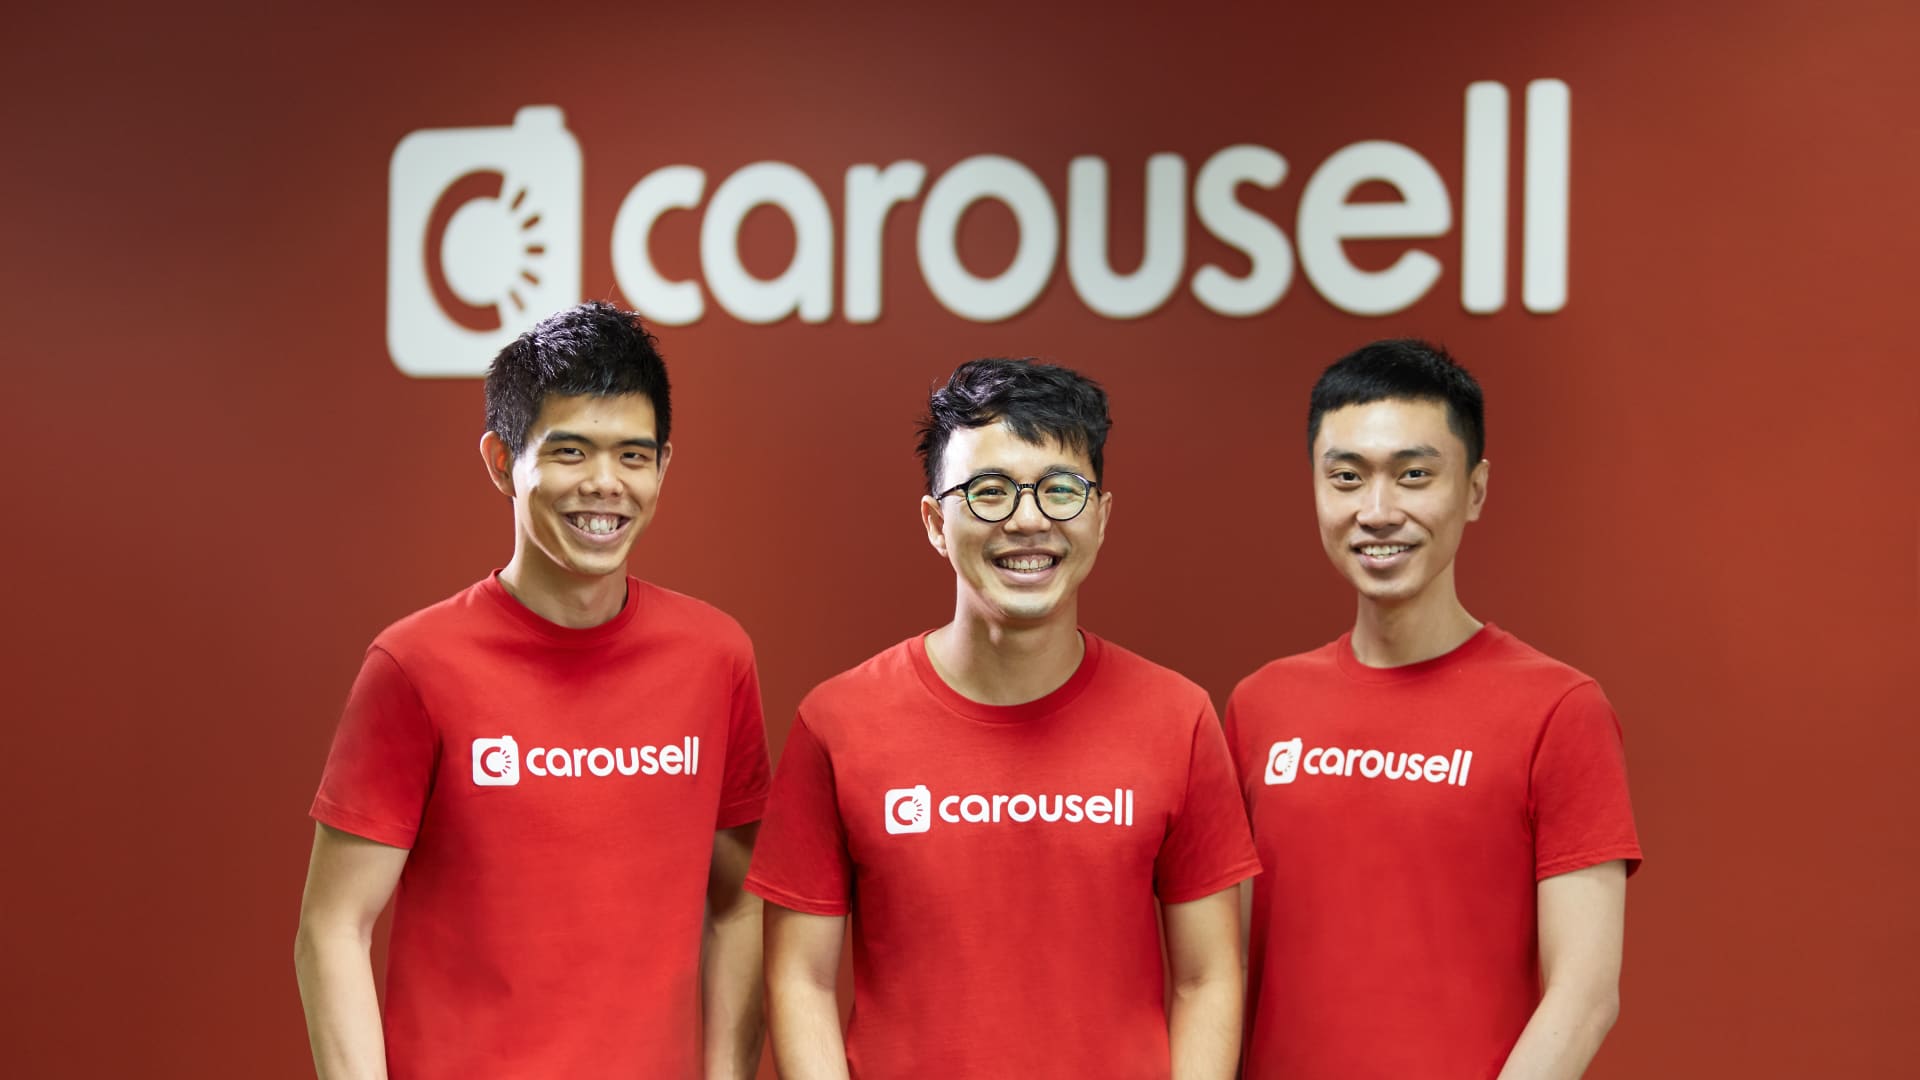 Carousell says it's 'on track' to profitability, plans to reduce losses this year